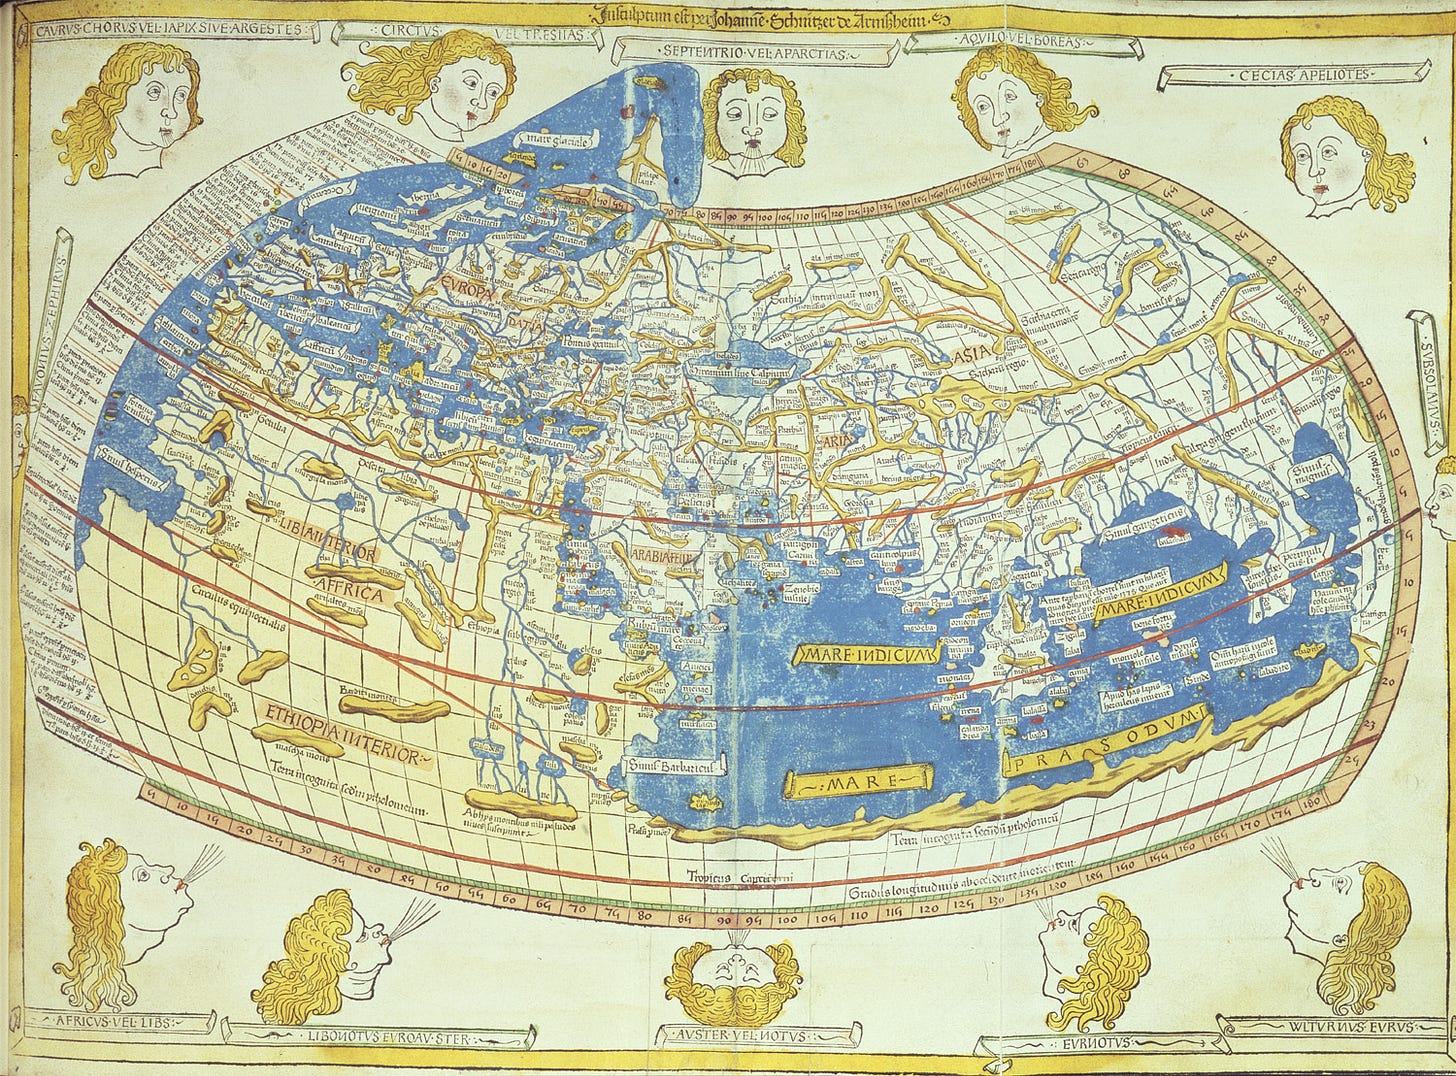 Image of Ptolemy's world map, 1482